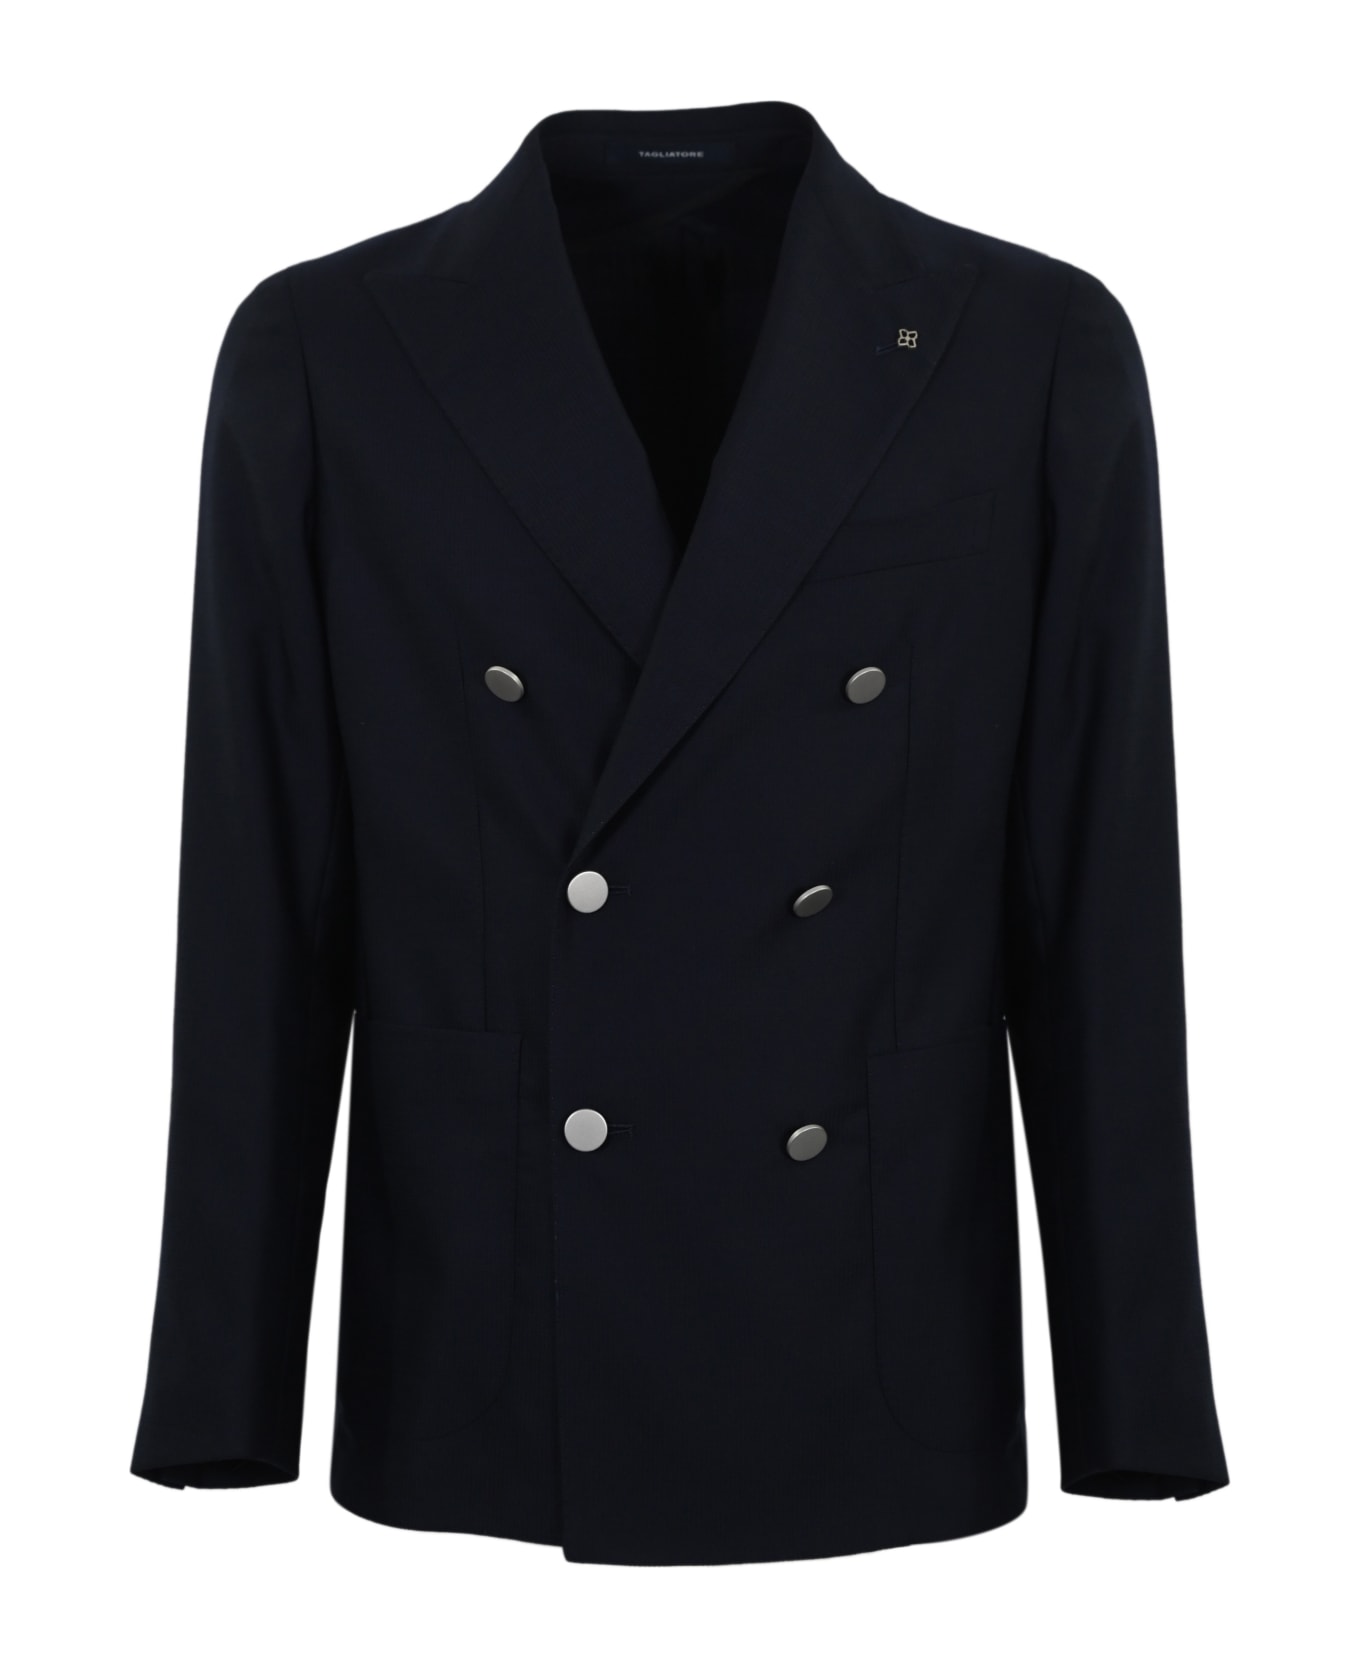 Tagliatore Double-breasted Wool Jacket